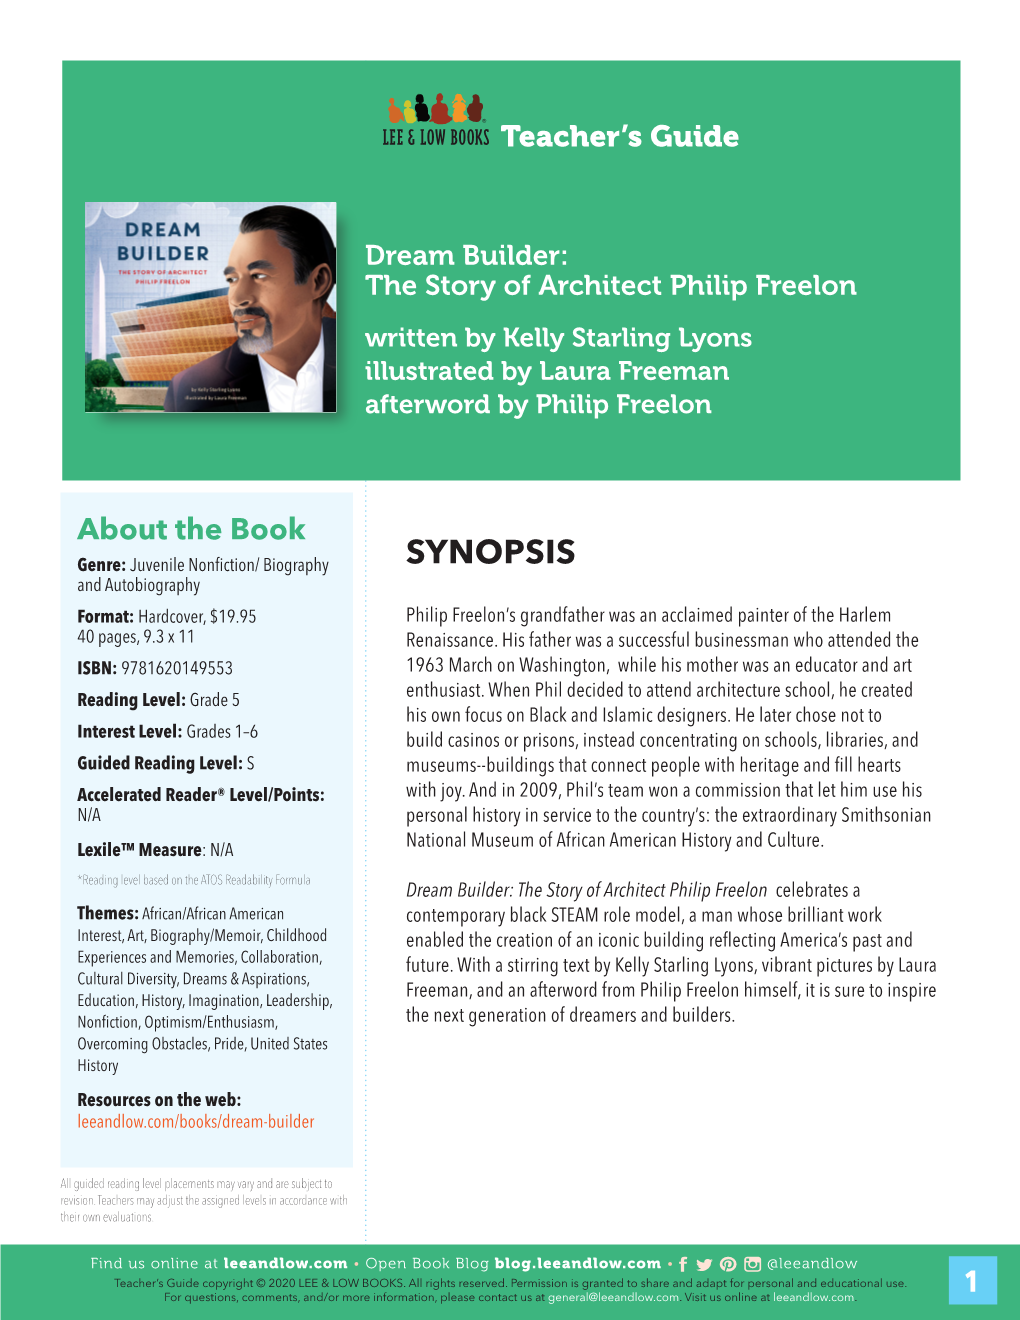 Dream Builder: the Story of Architect Philip Freelon Written by Kelly Starling Lyons Illustrated by Laura Freeman Afterword by Philip Freelon